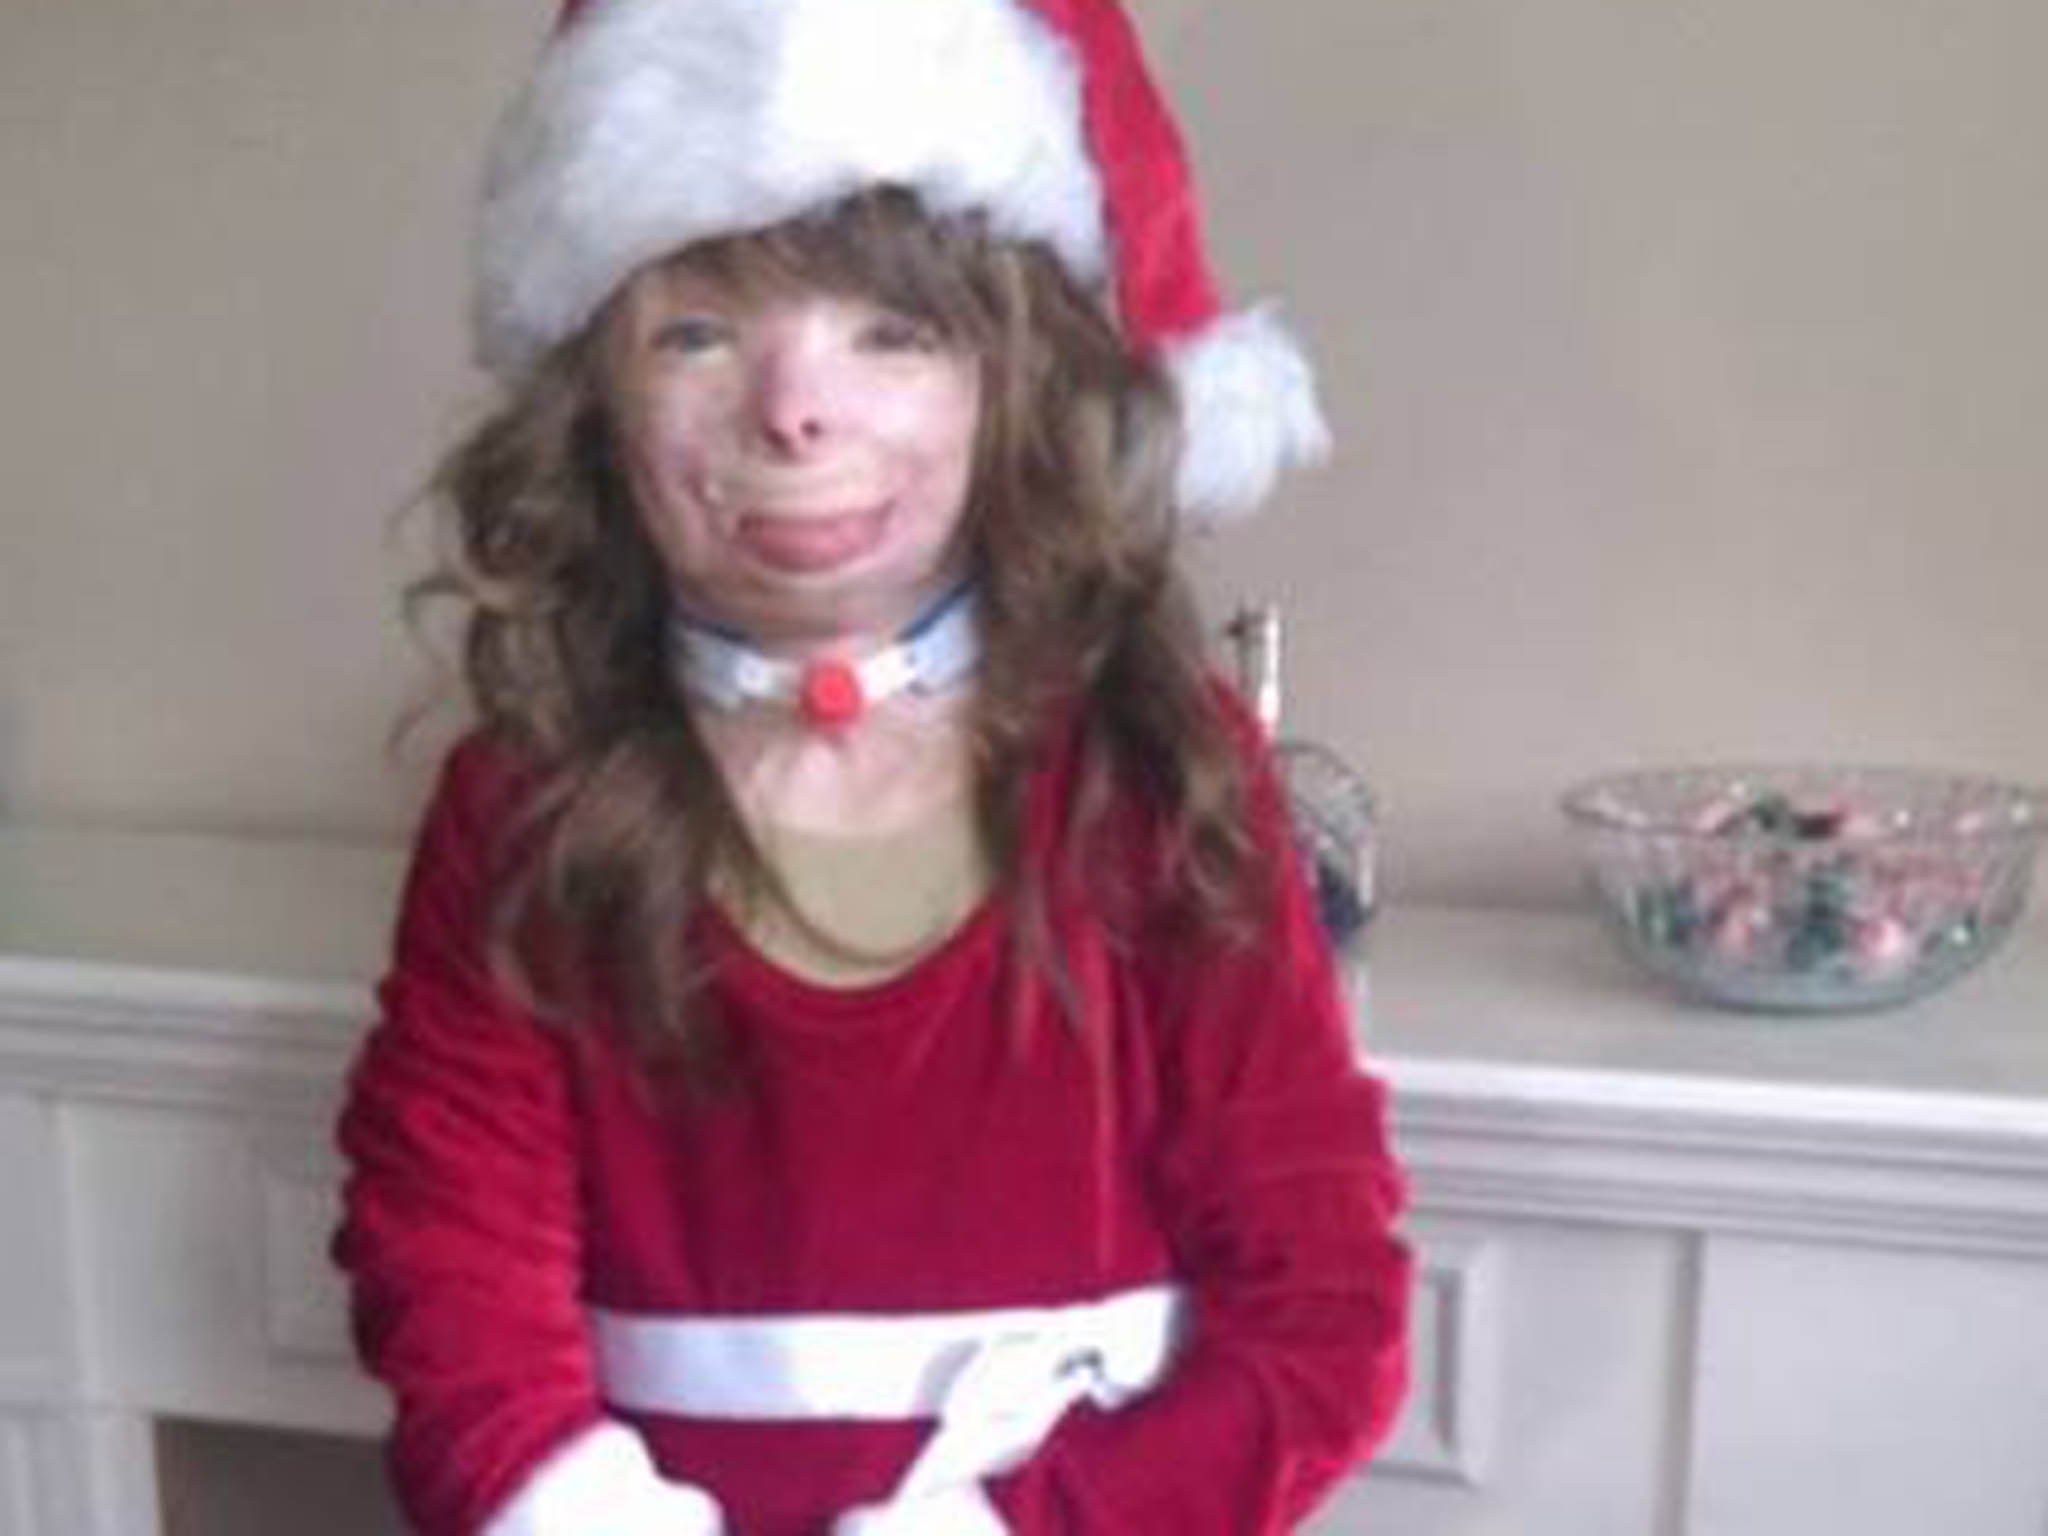 Safyre is now 8 and is preparing to celebrate Christmas without her immediate family — and she has asked strangers for help